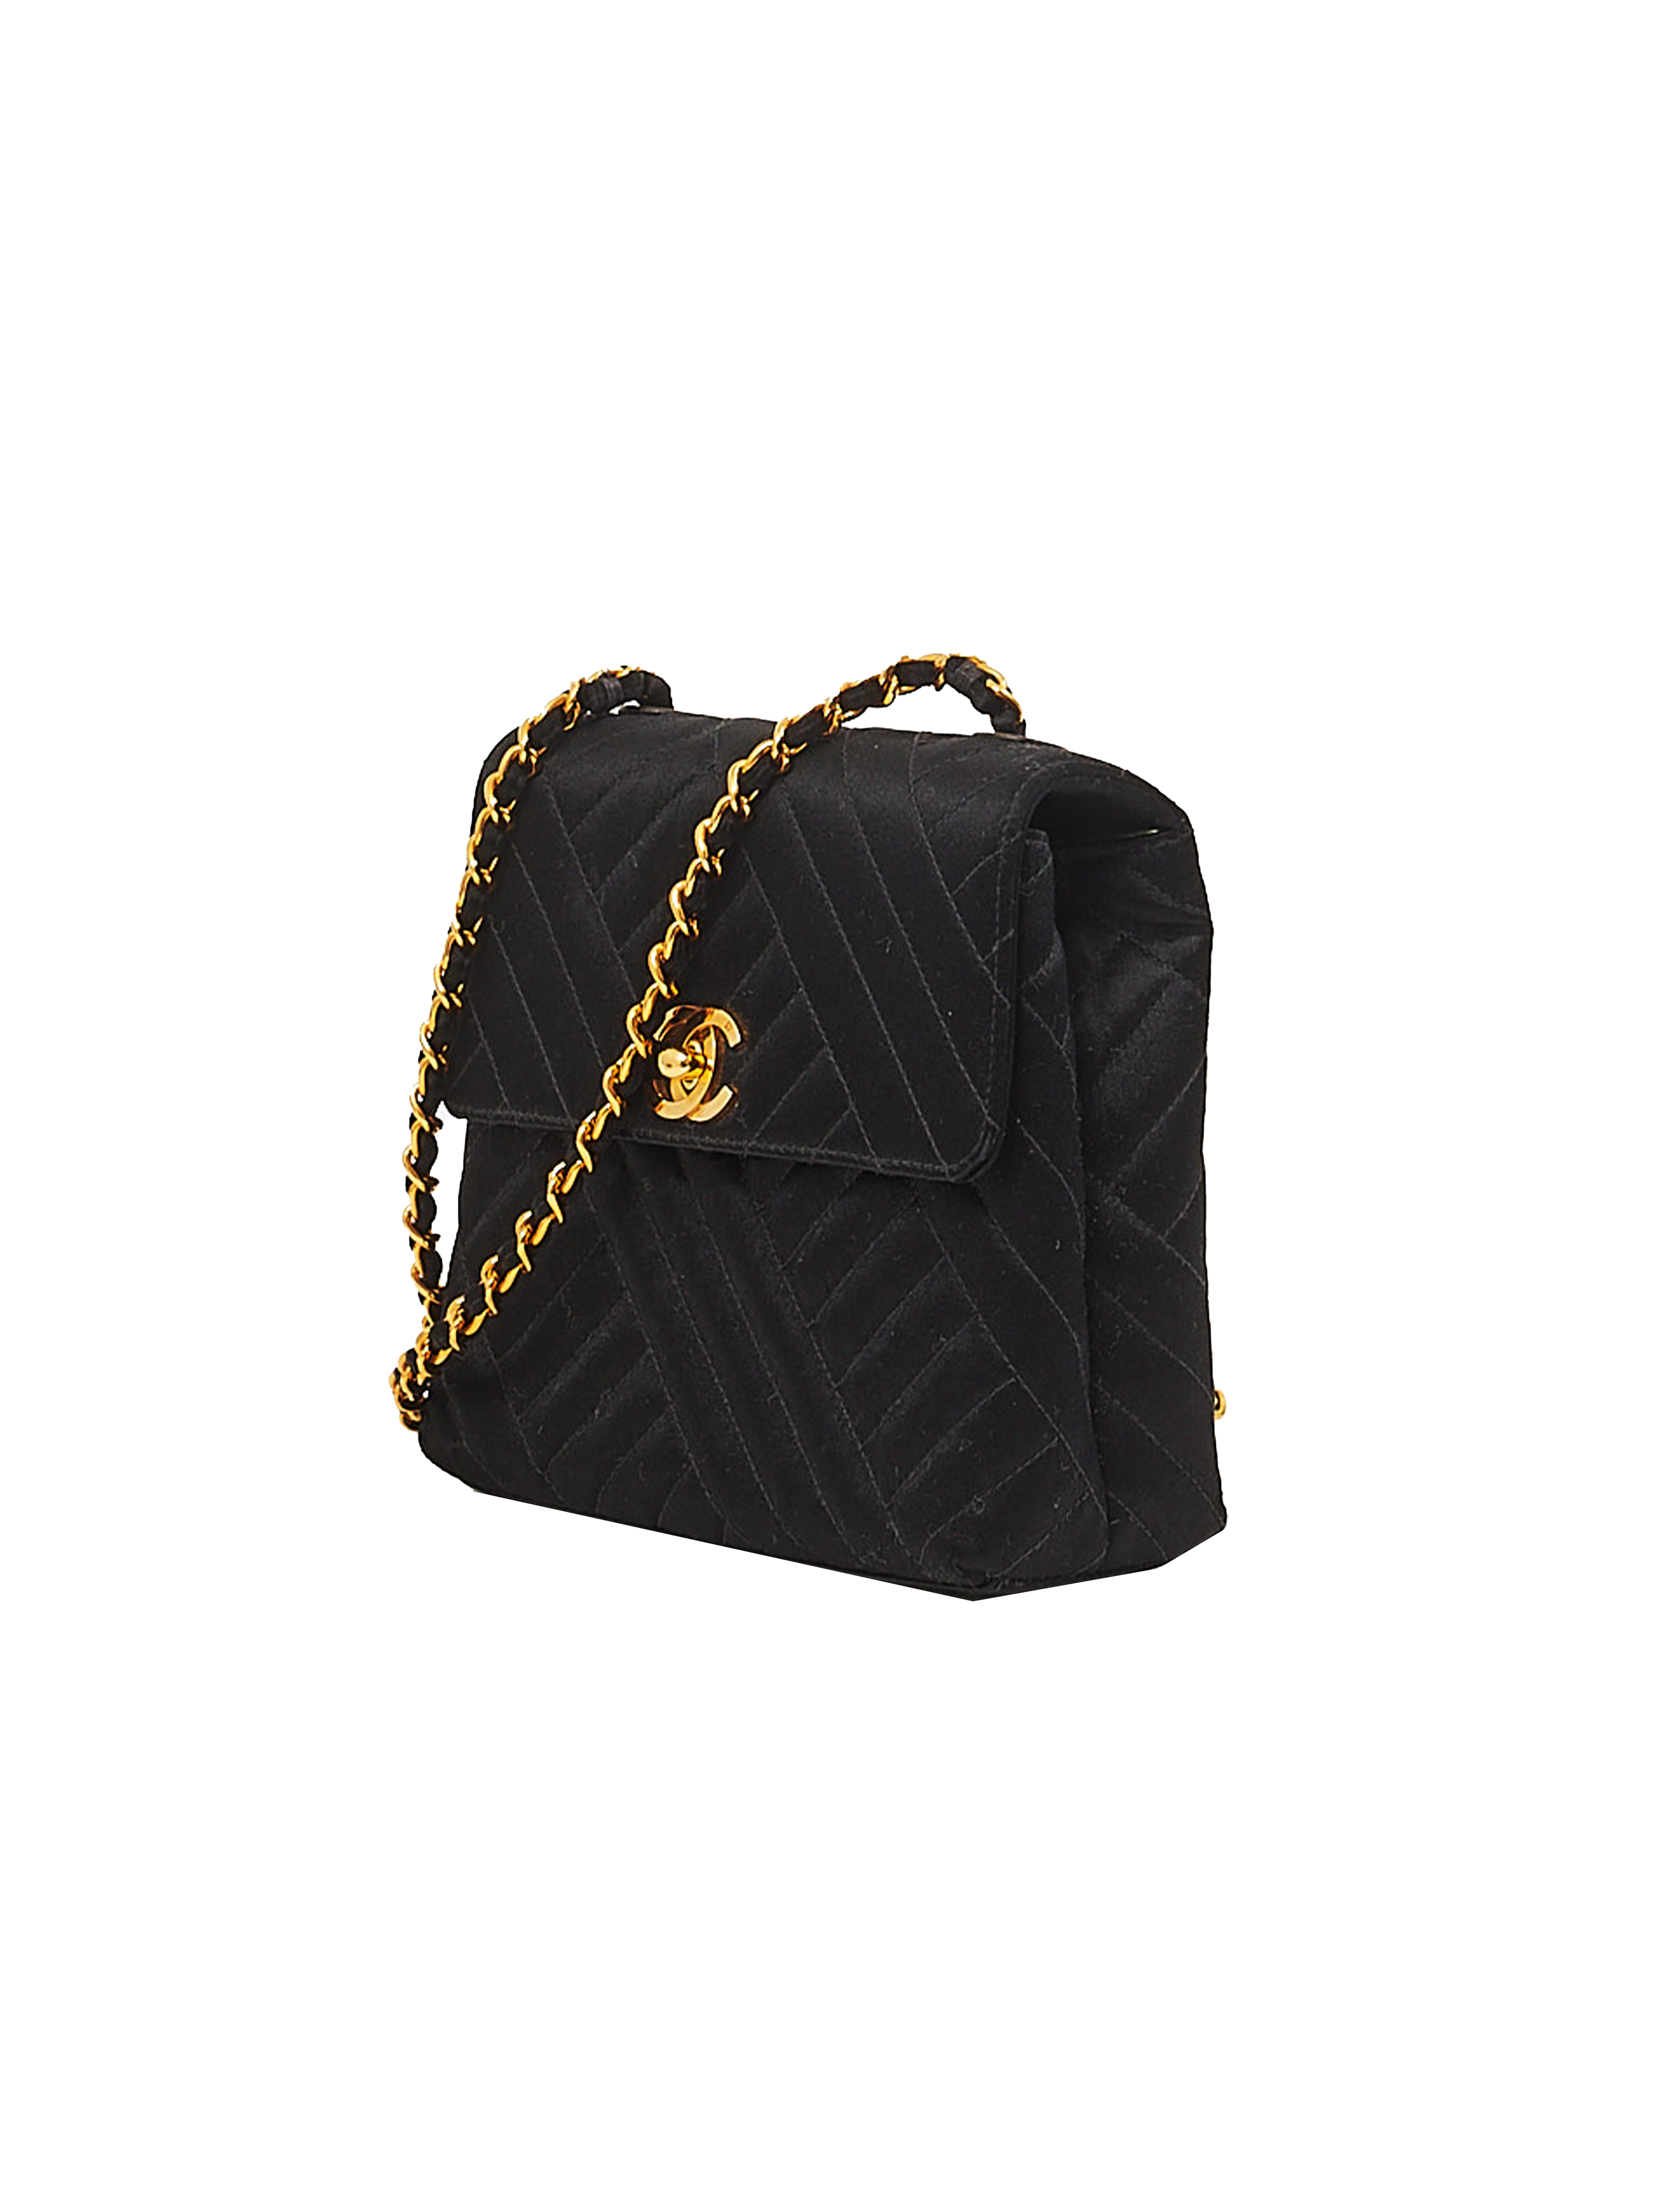 Chanel Vintage Black Woven Satin CC Flap Bag Gold Hardware, 1991-1994  Available For Immediate Sale At Sotheby's